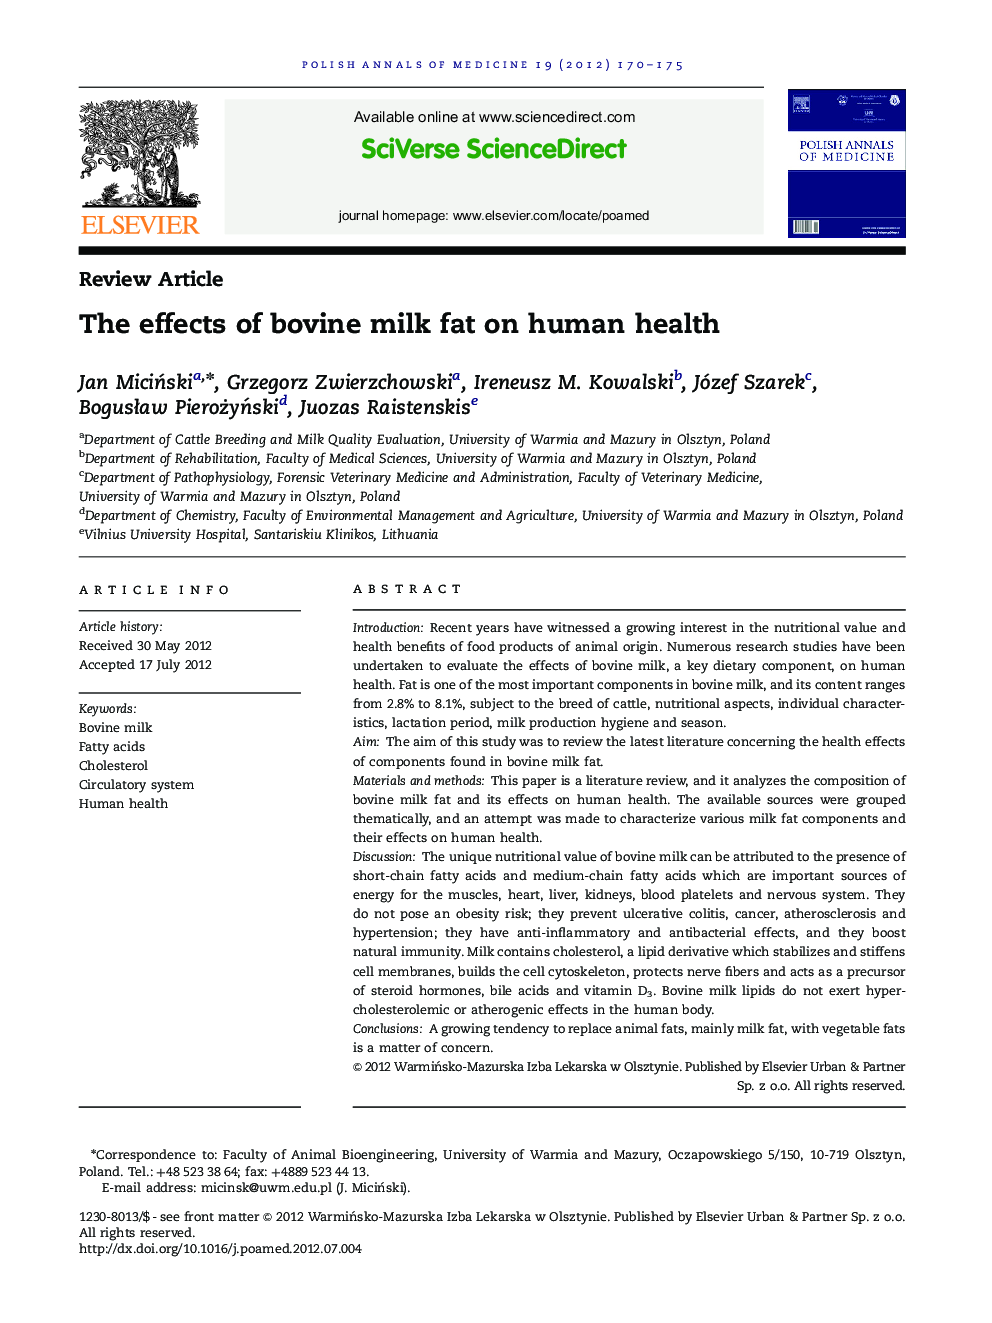 The effects of bovine milk fat on human health